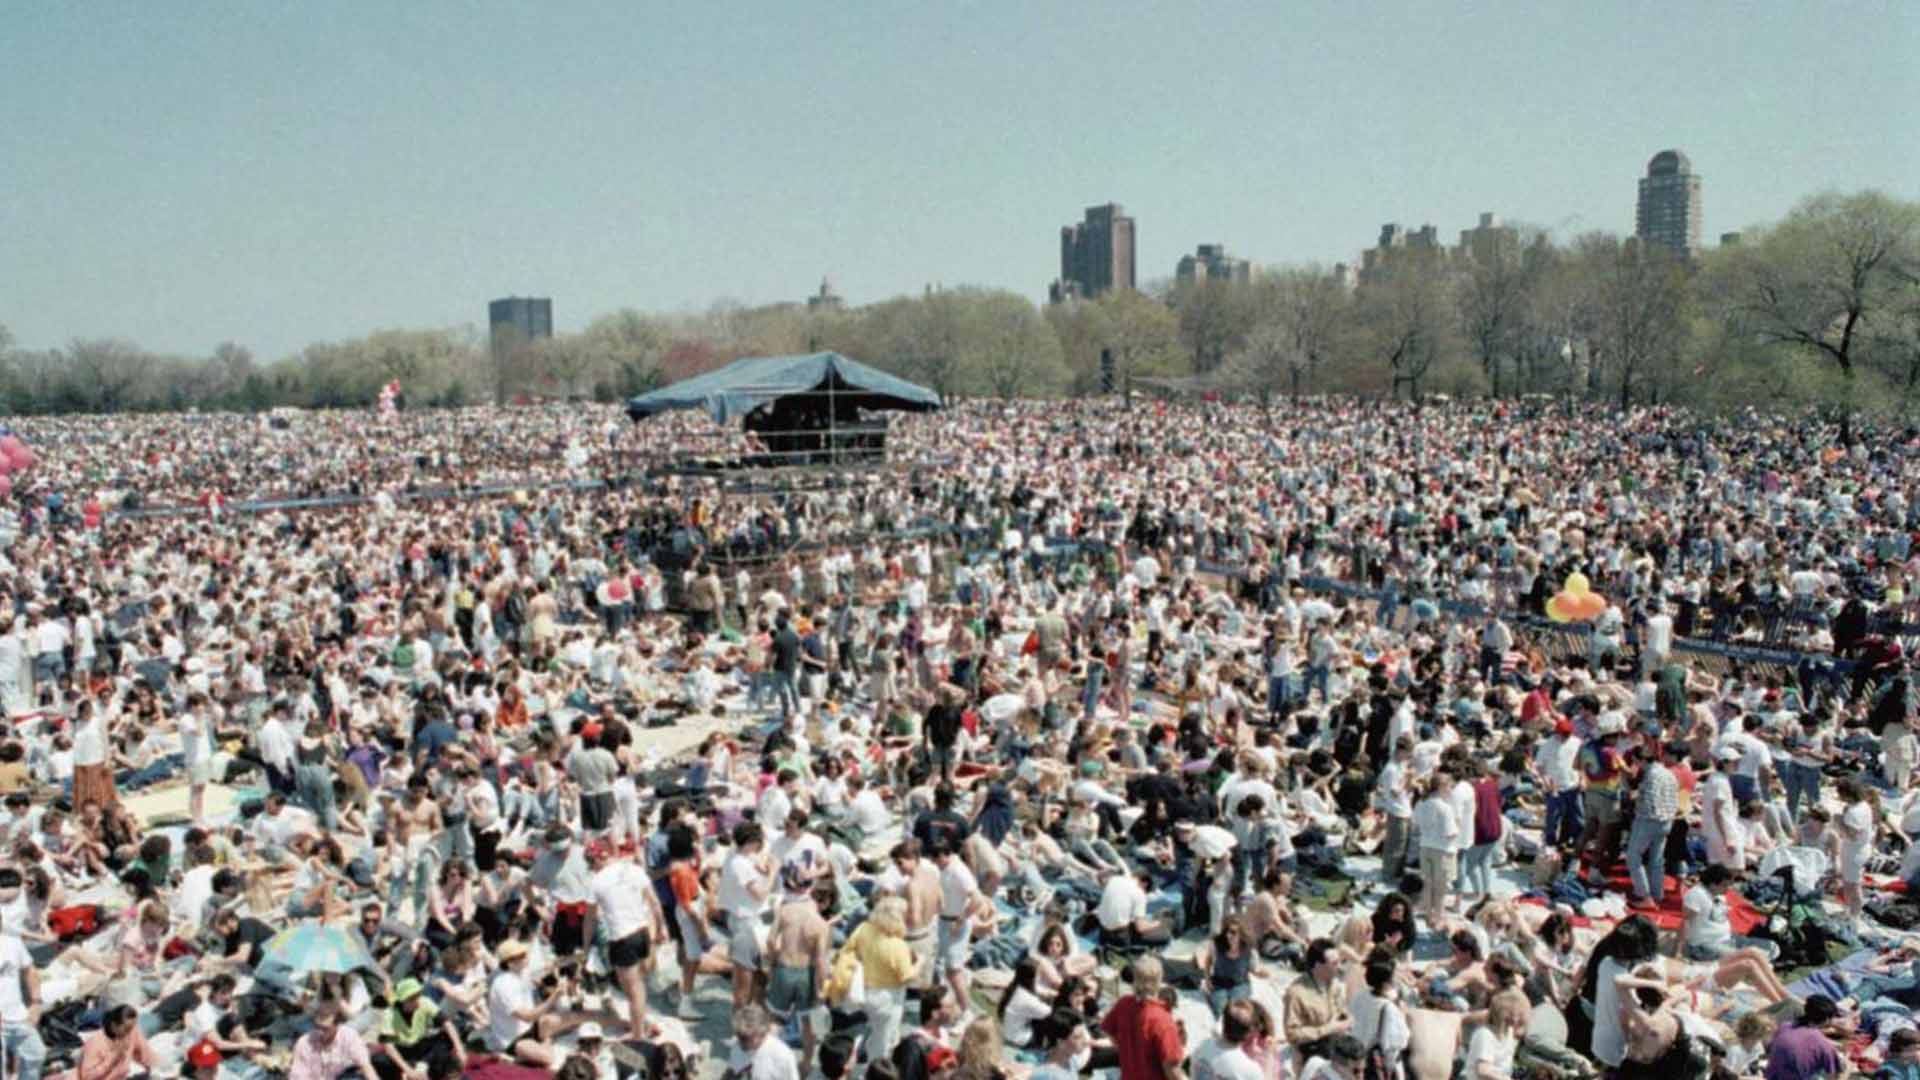 Earth Day concert and demonstration in Central Park, April 22, 1990; Photo Credit: AP Photo